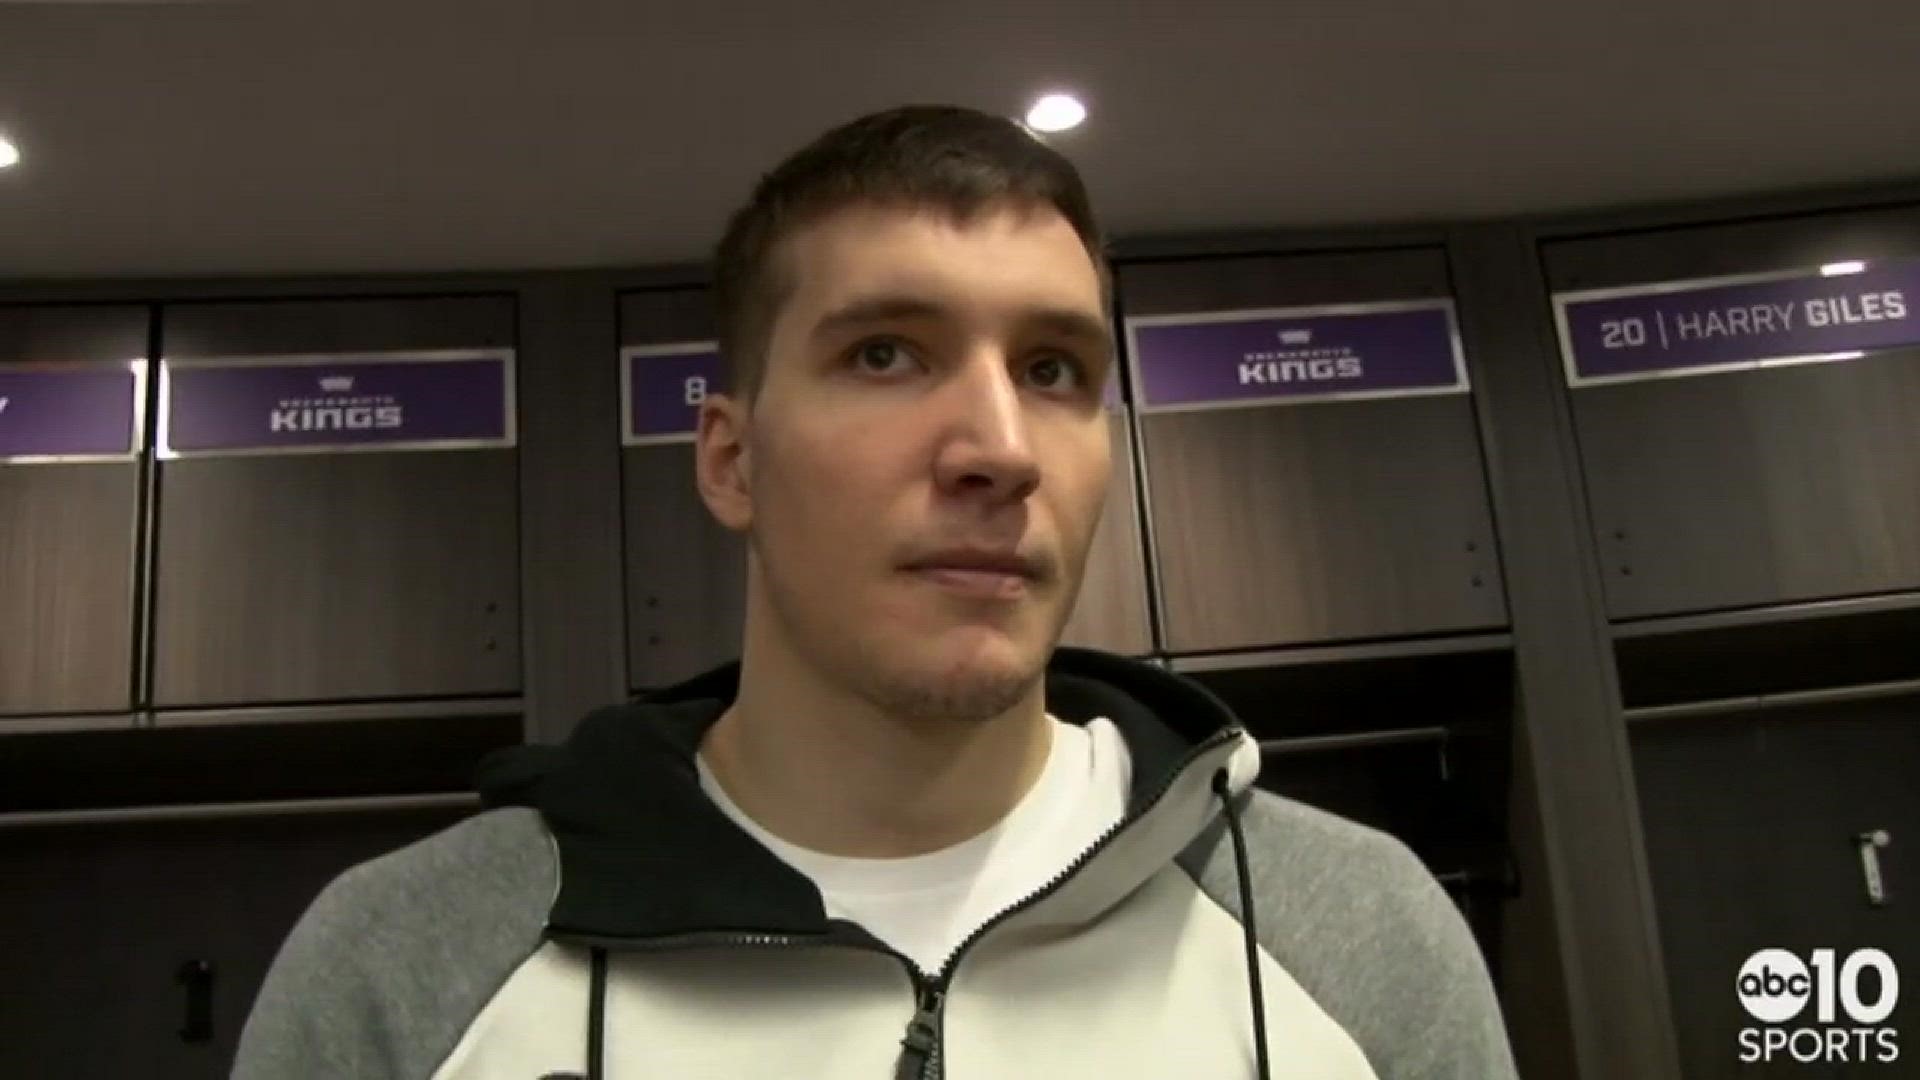 Following Sunday's loss in Sacramento to the Boston Celtics, Bogdan Bogdanovic talks about what went wrong for his Kings team and talks about his recent struggles as the season winds down.